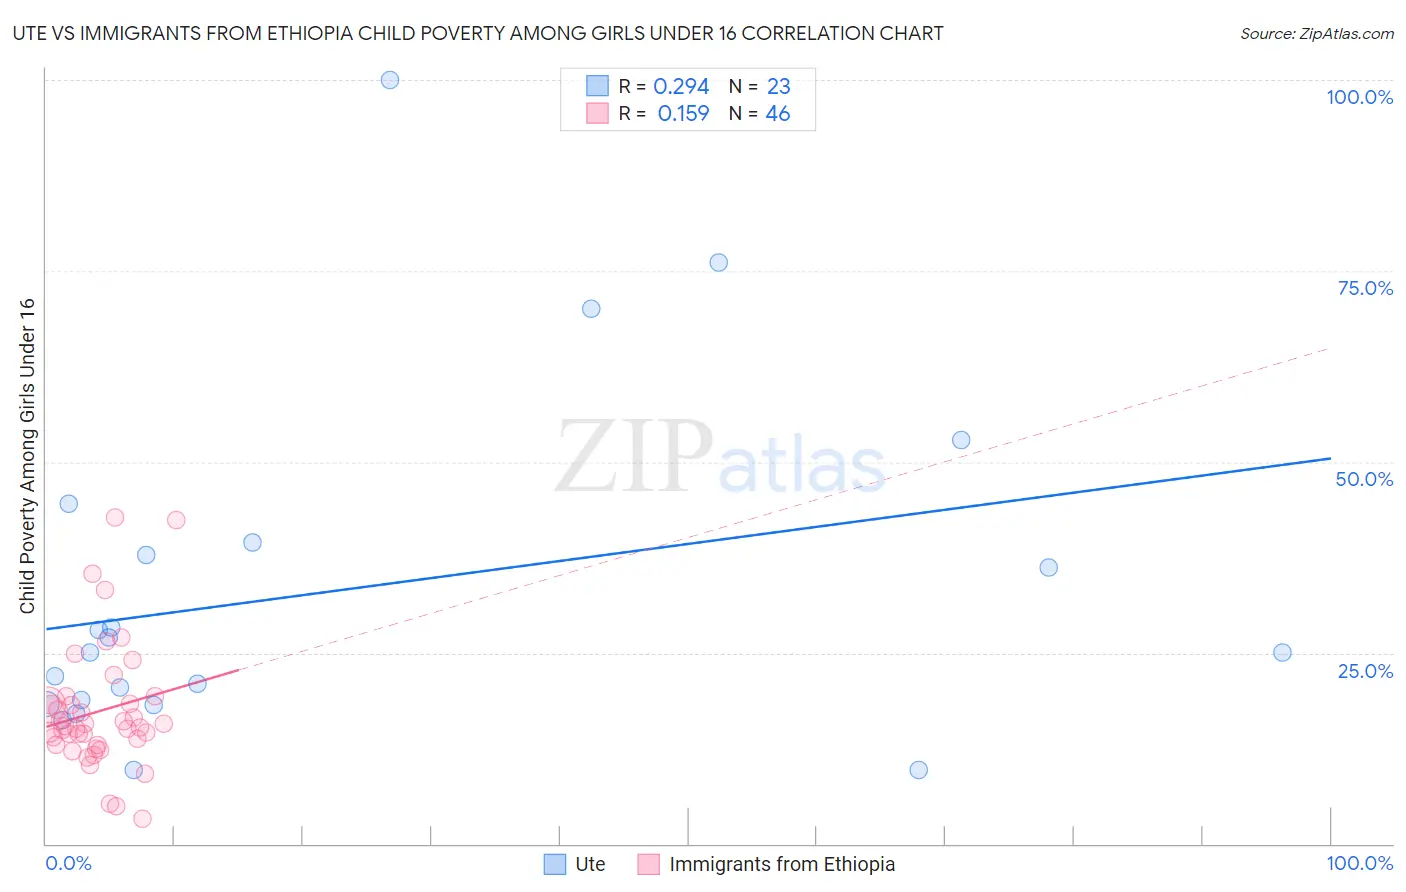 Ute vs Immigrants from Ethiopia Child Poverty Among Girls Under 16